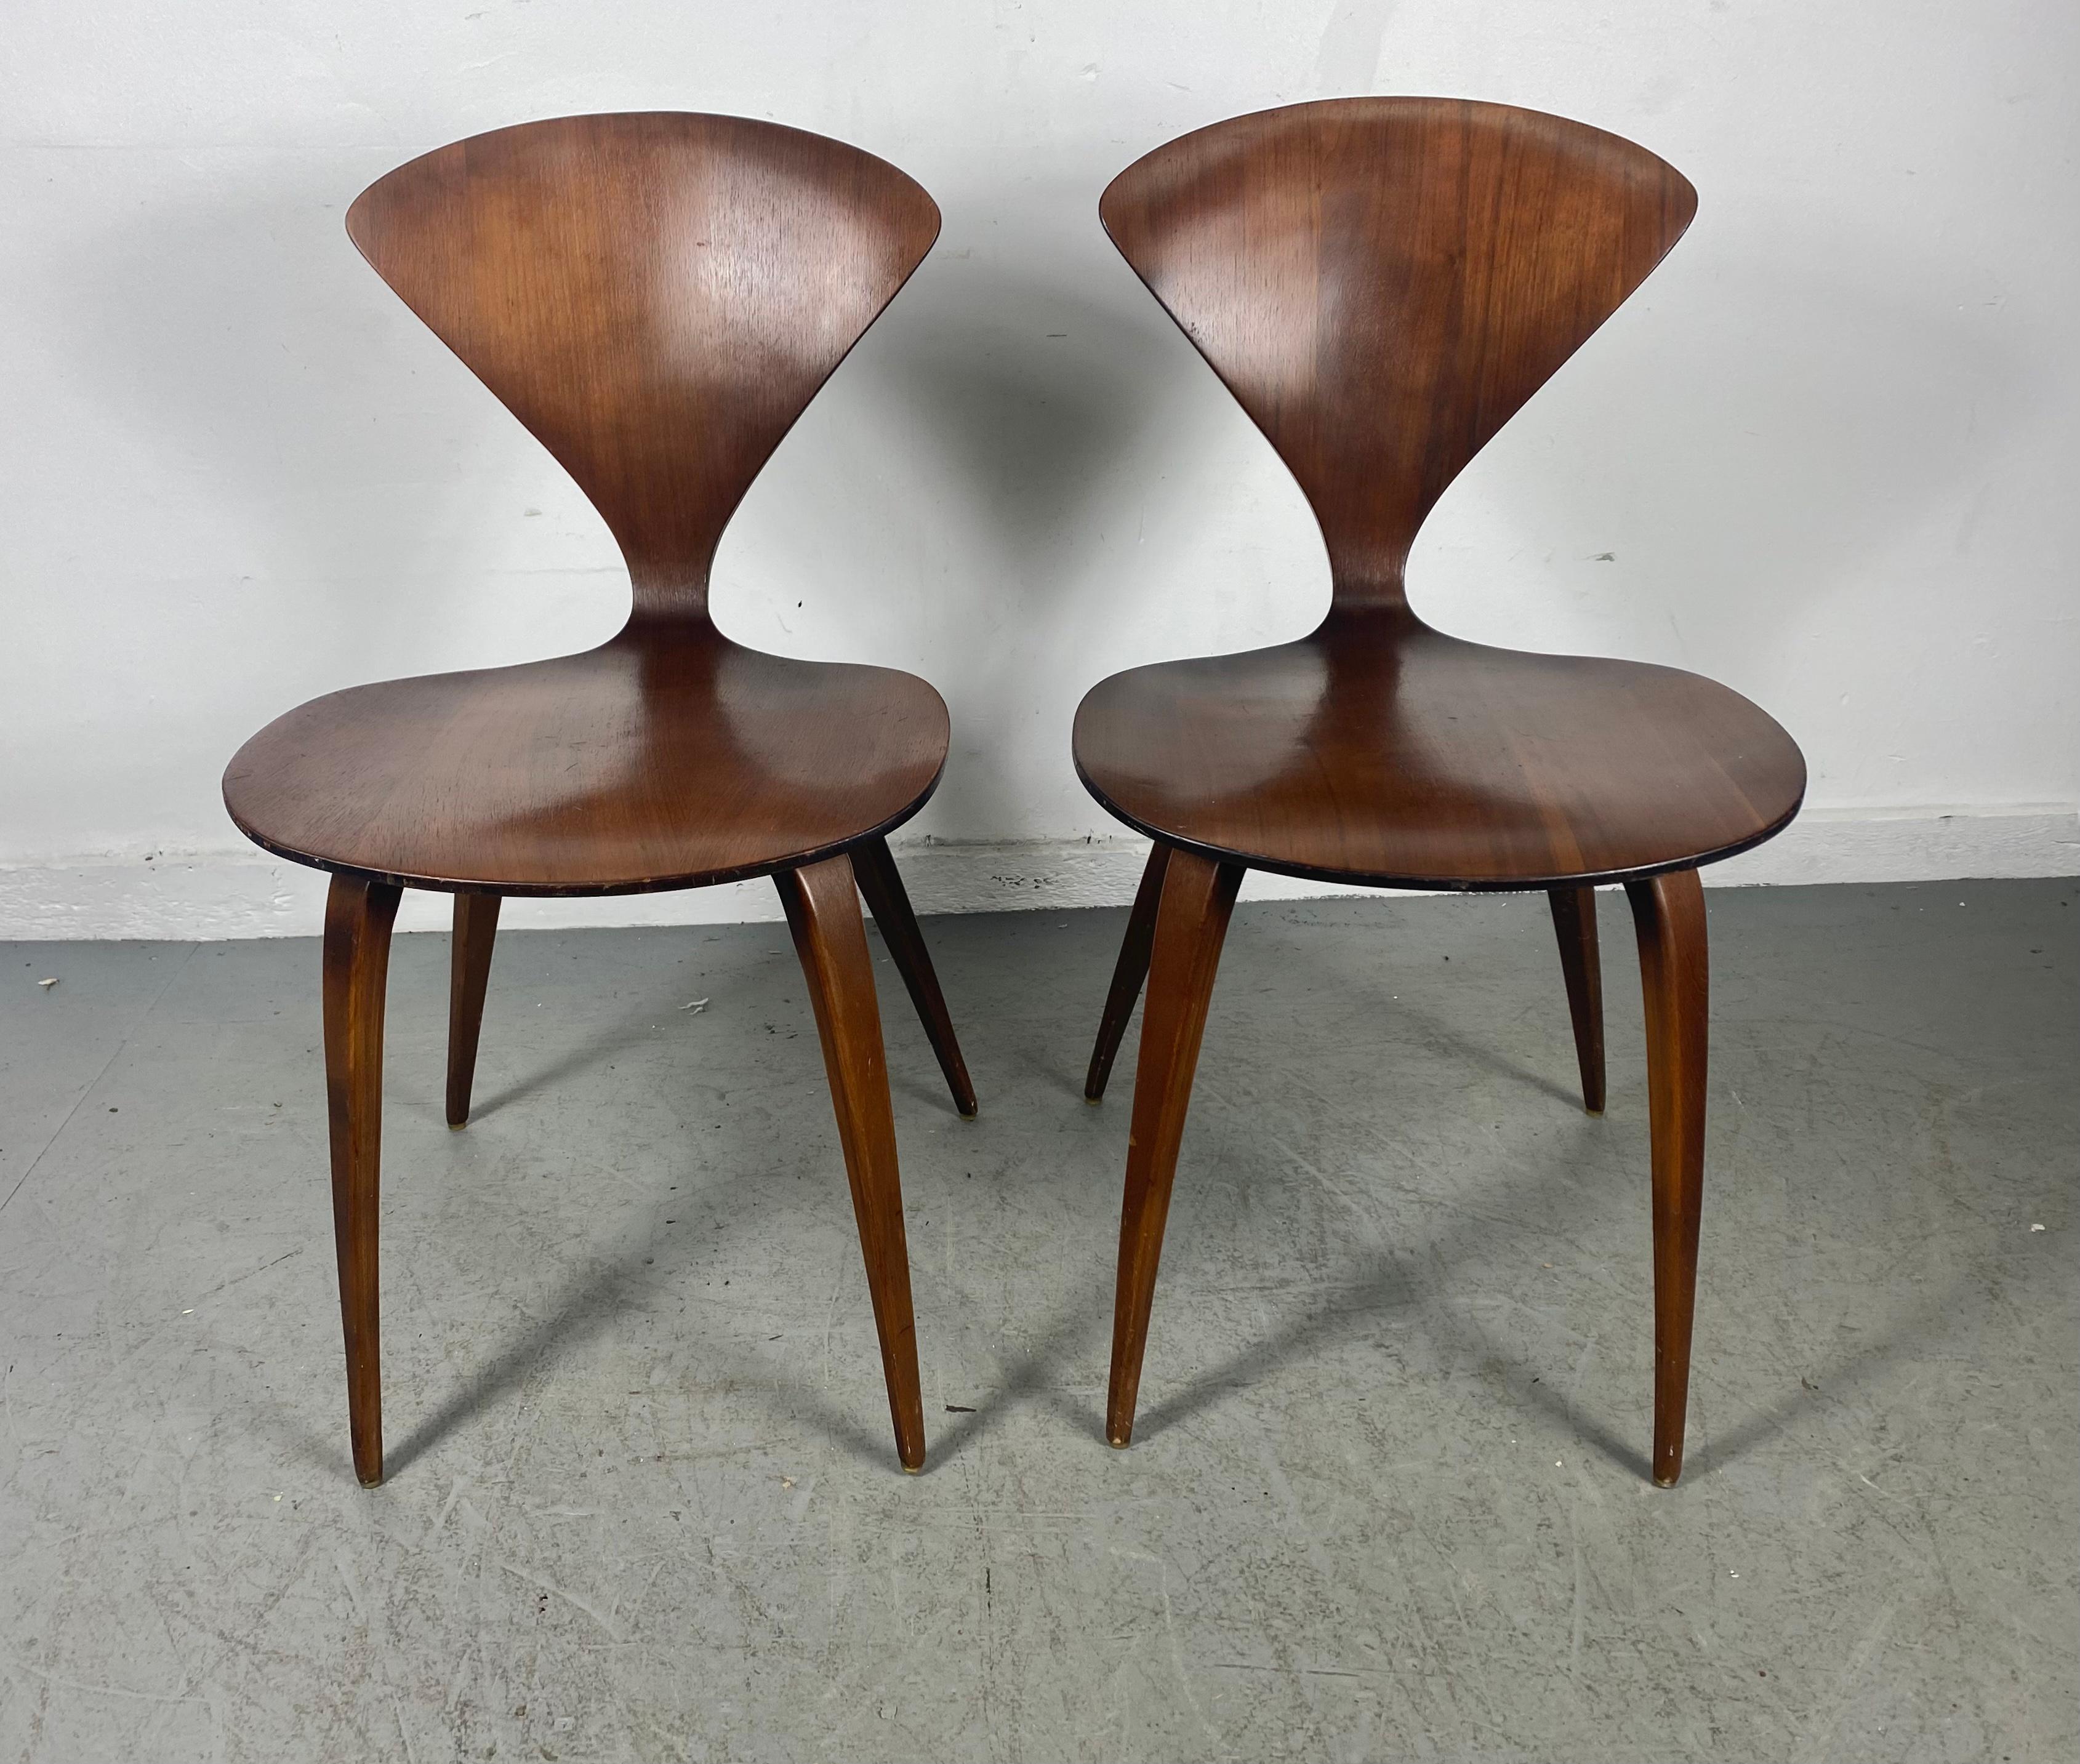 Classic Pair Modernist plywood side (dining) chairs by Norman Cherner for Plycraft, ,Stunning sculptural walnut made from steam form bent walnut plywood ,,c.1950. .Nice original condition,, Wonderful patina..